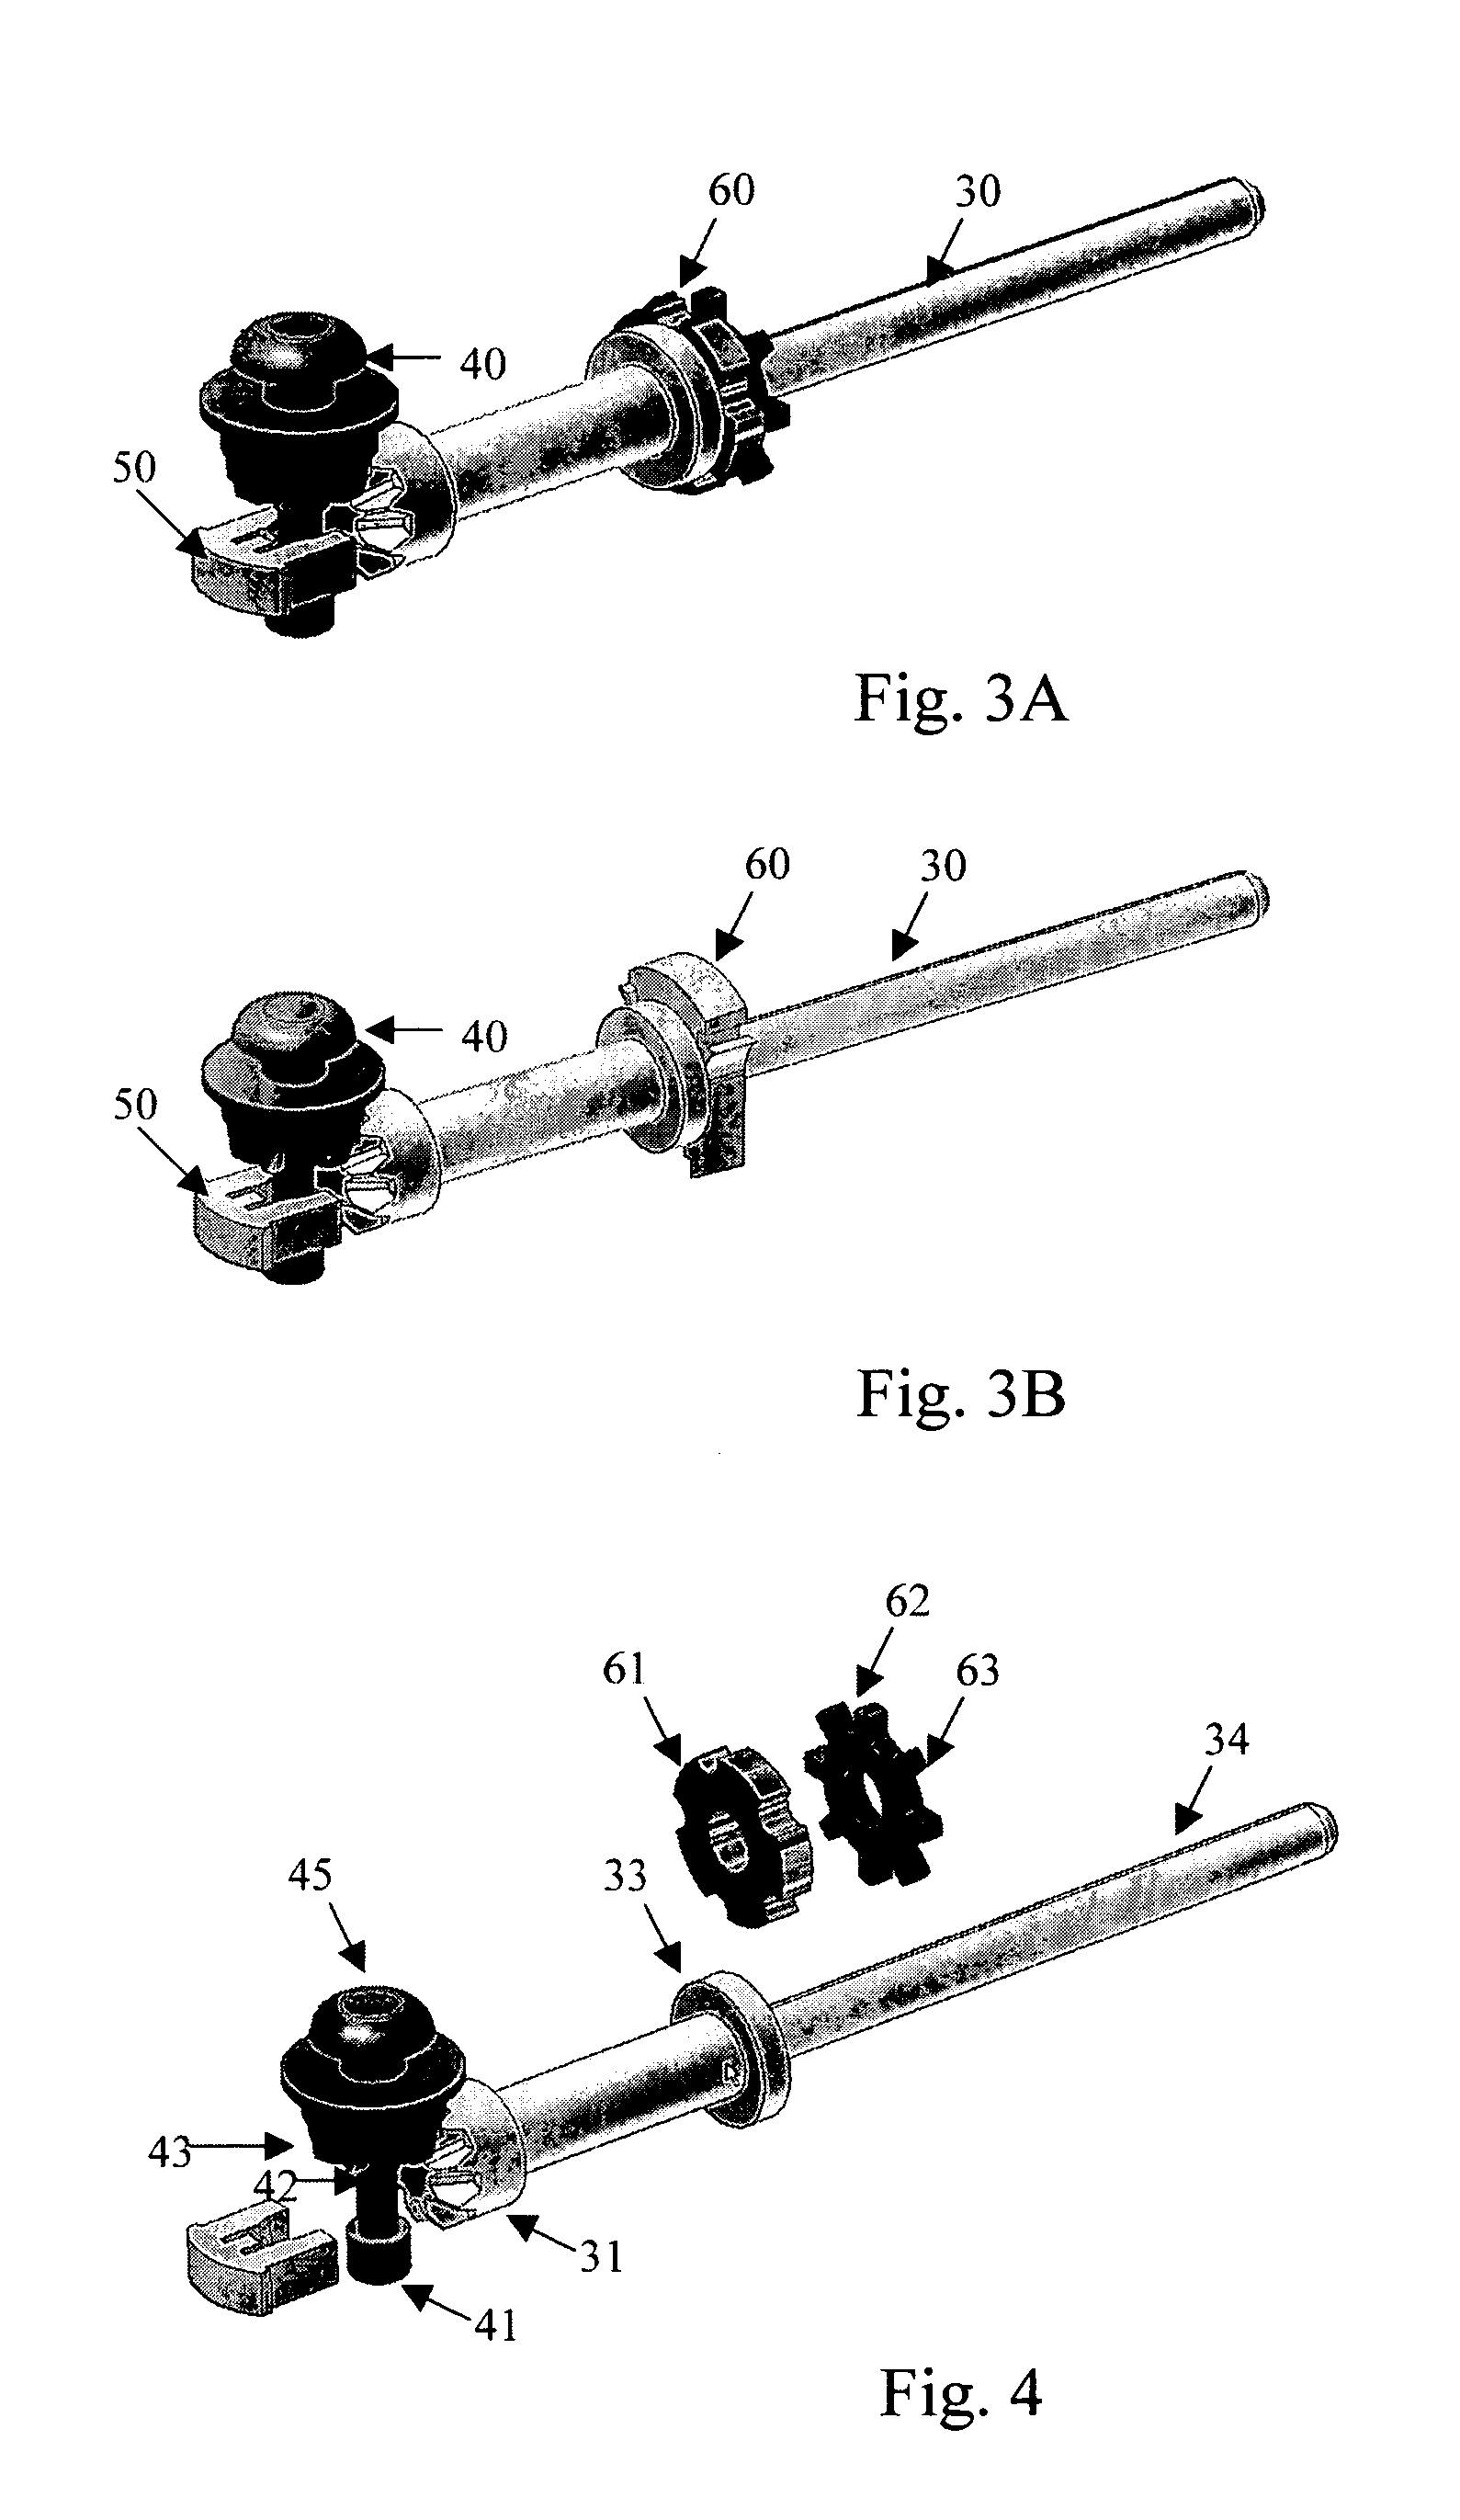 Disposable dental prophy angle with secure retention mechanism